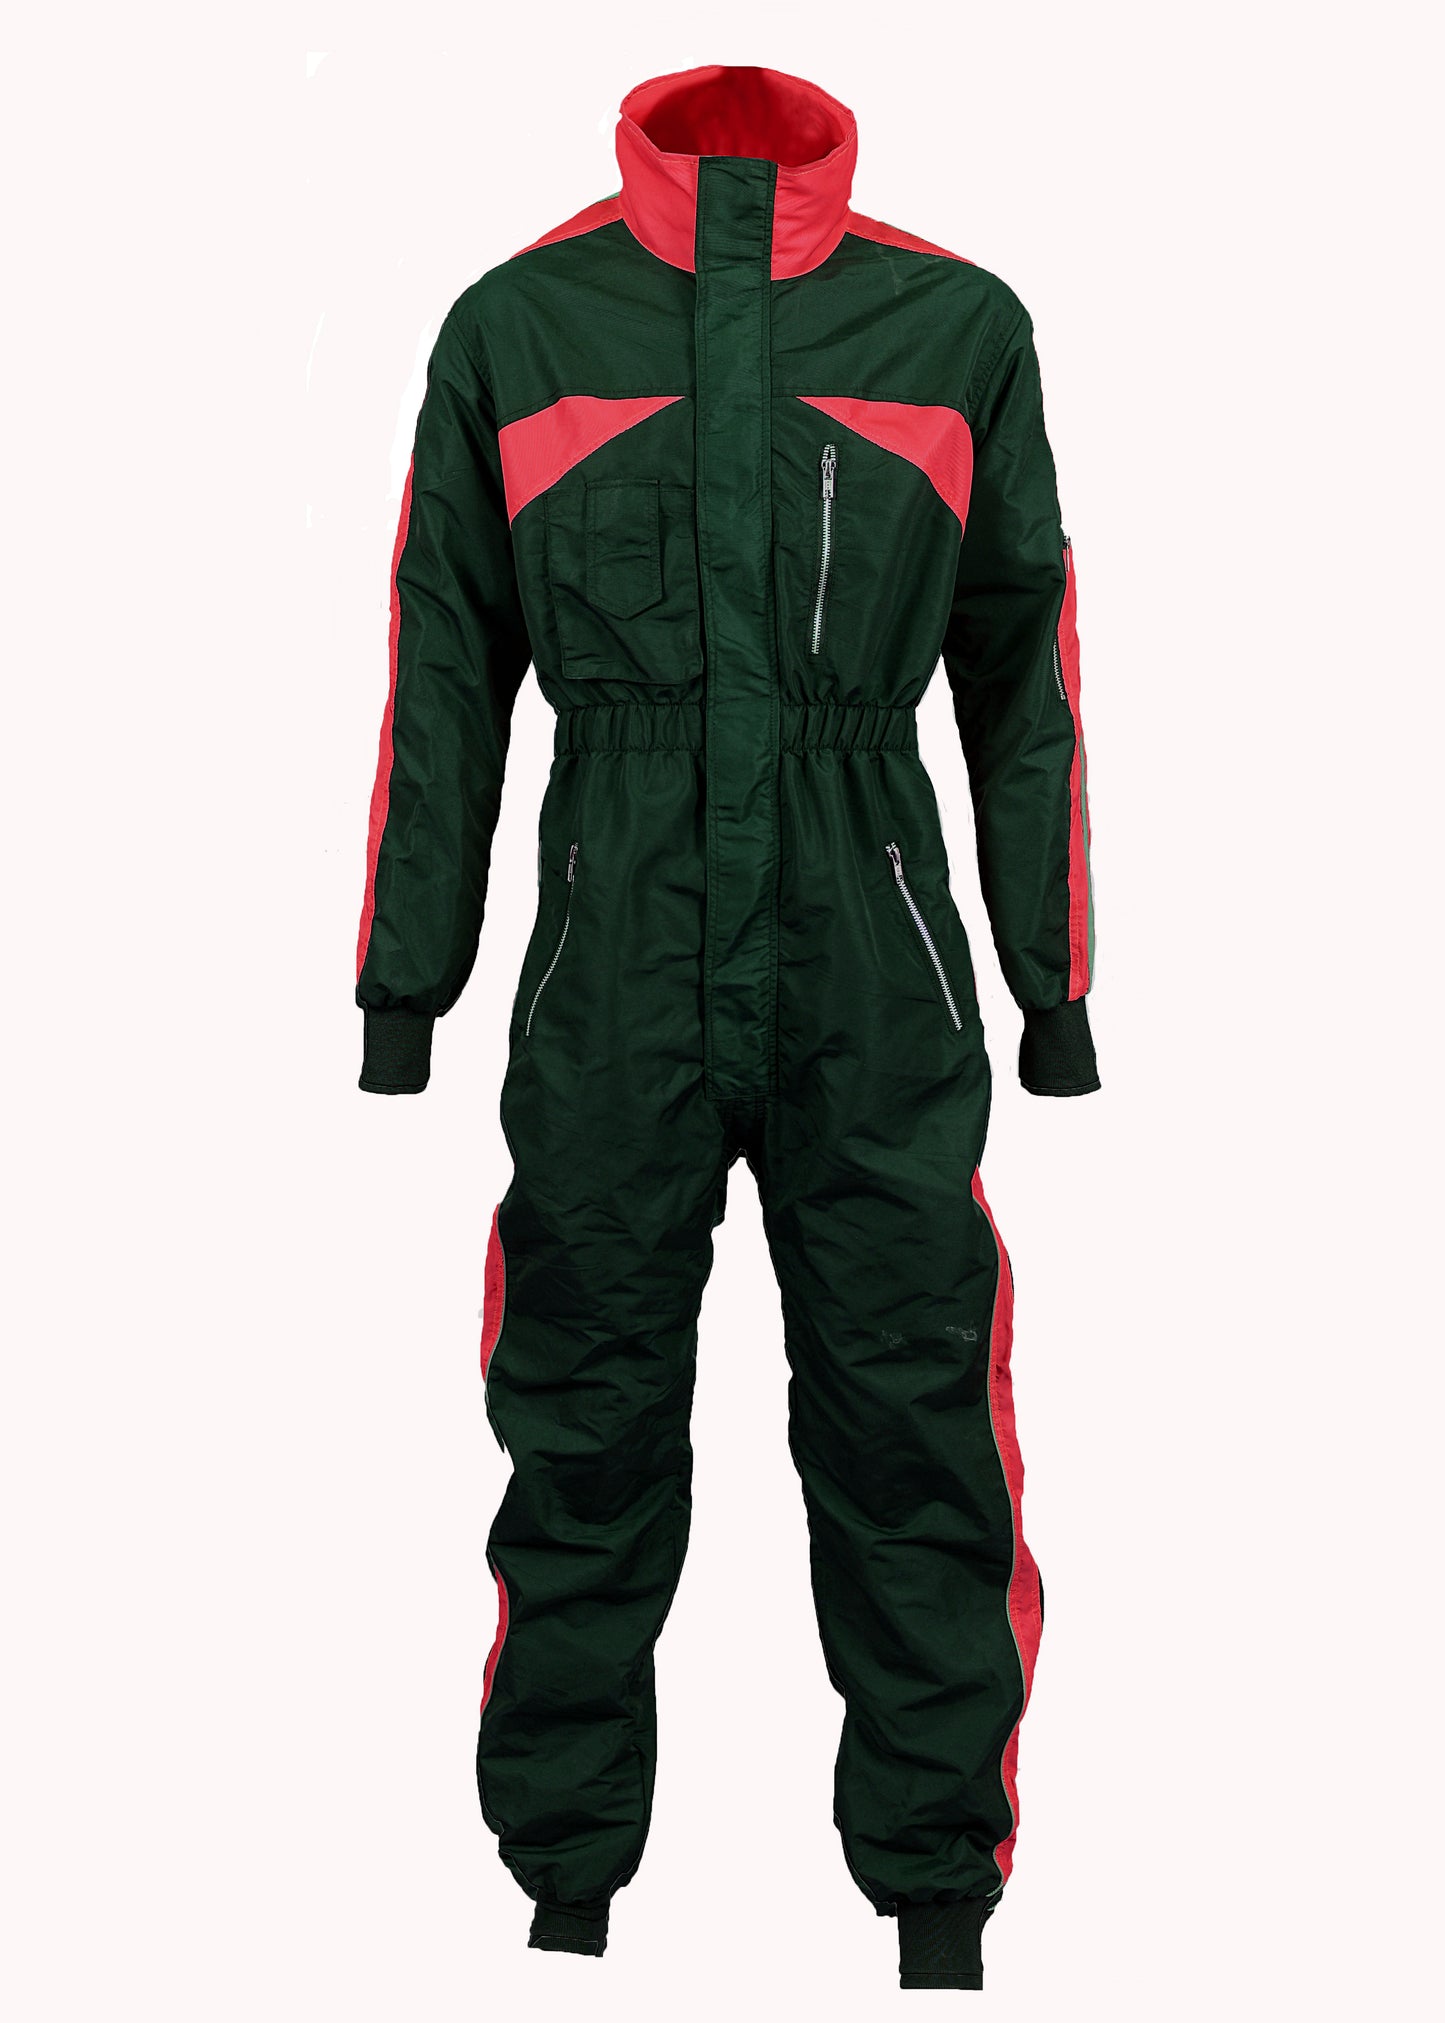 Paragliding Suit in Red Color NC-38